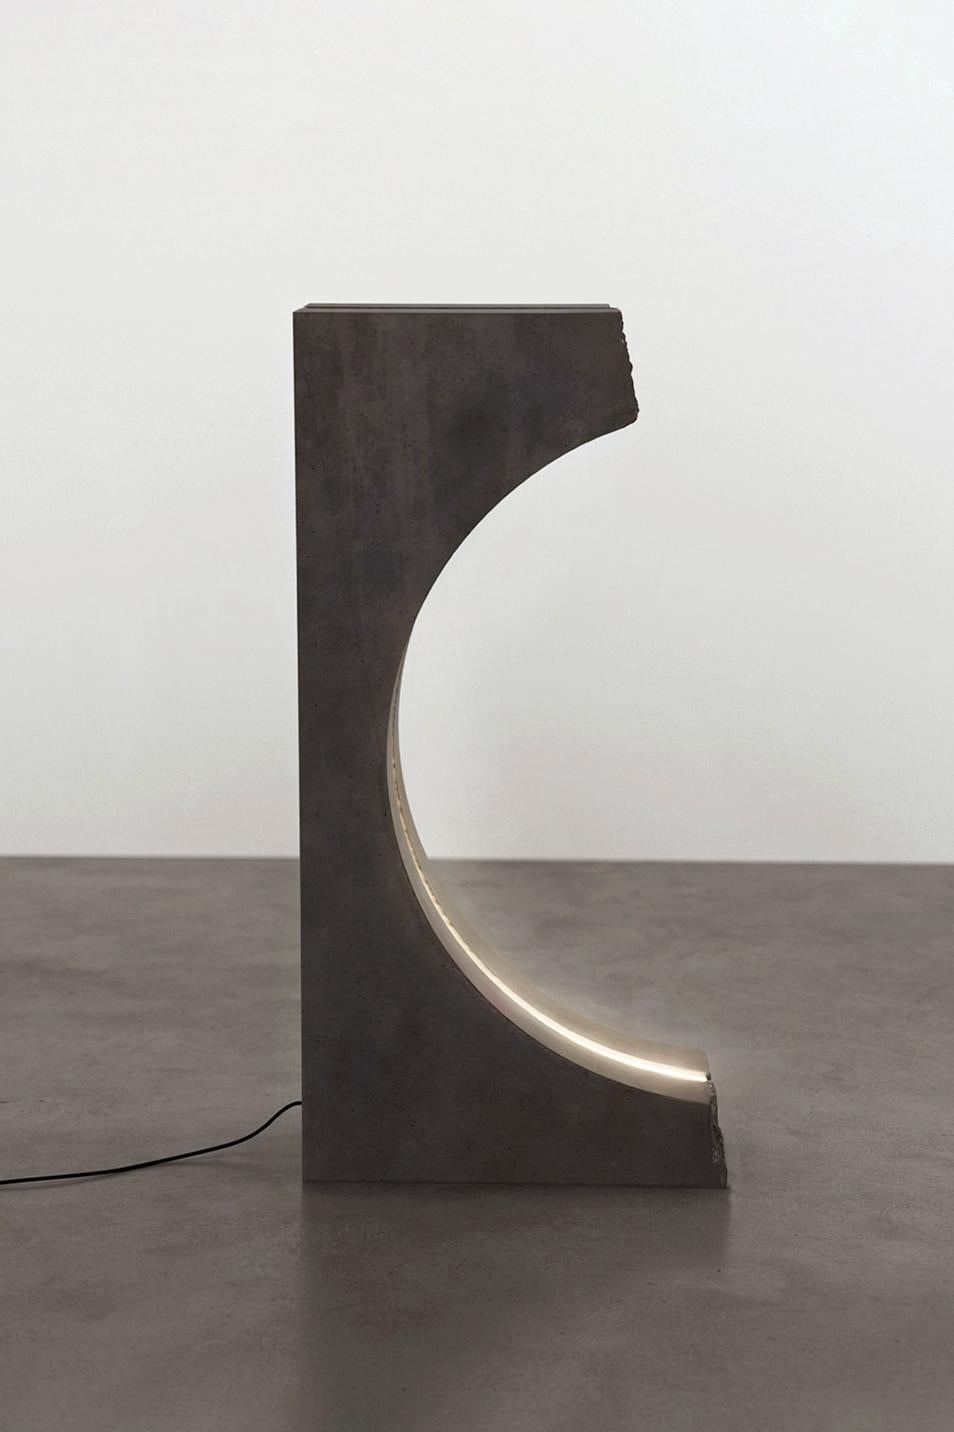 Berlin lamp by Boldizar Senteski
Dimensions: 50 W x 23 D x H 100 cm
Materials: black concrete, steel, led
Sculptural concrete standing lamp with dimmable LED lighting
Growing up in Budapest, Boldizar Senteski was influenced by the eclectic